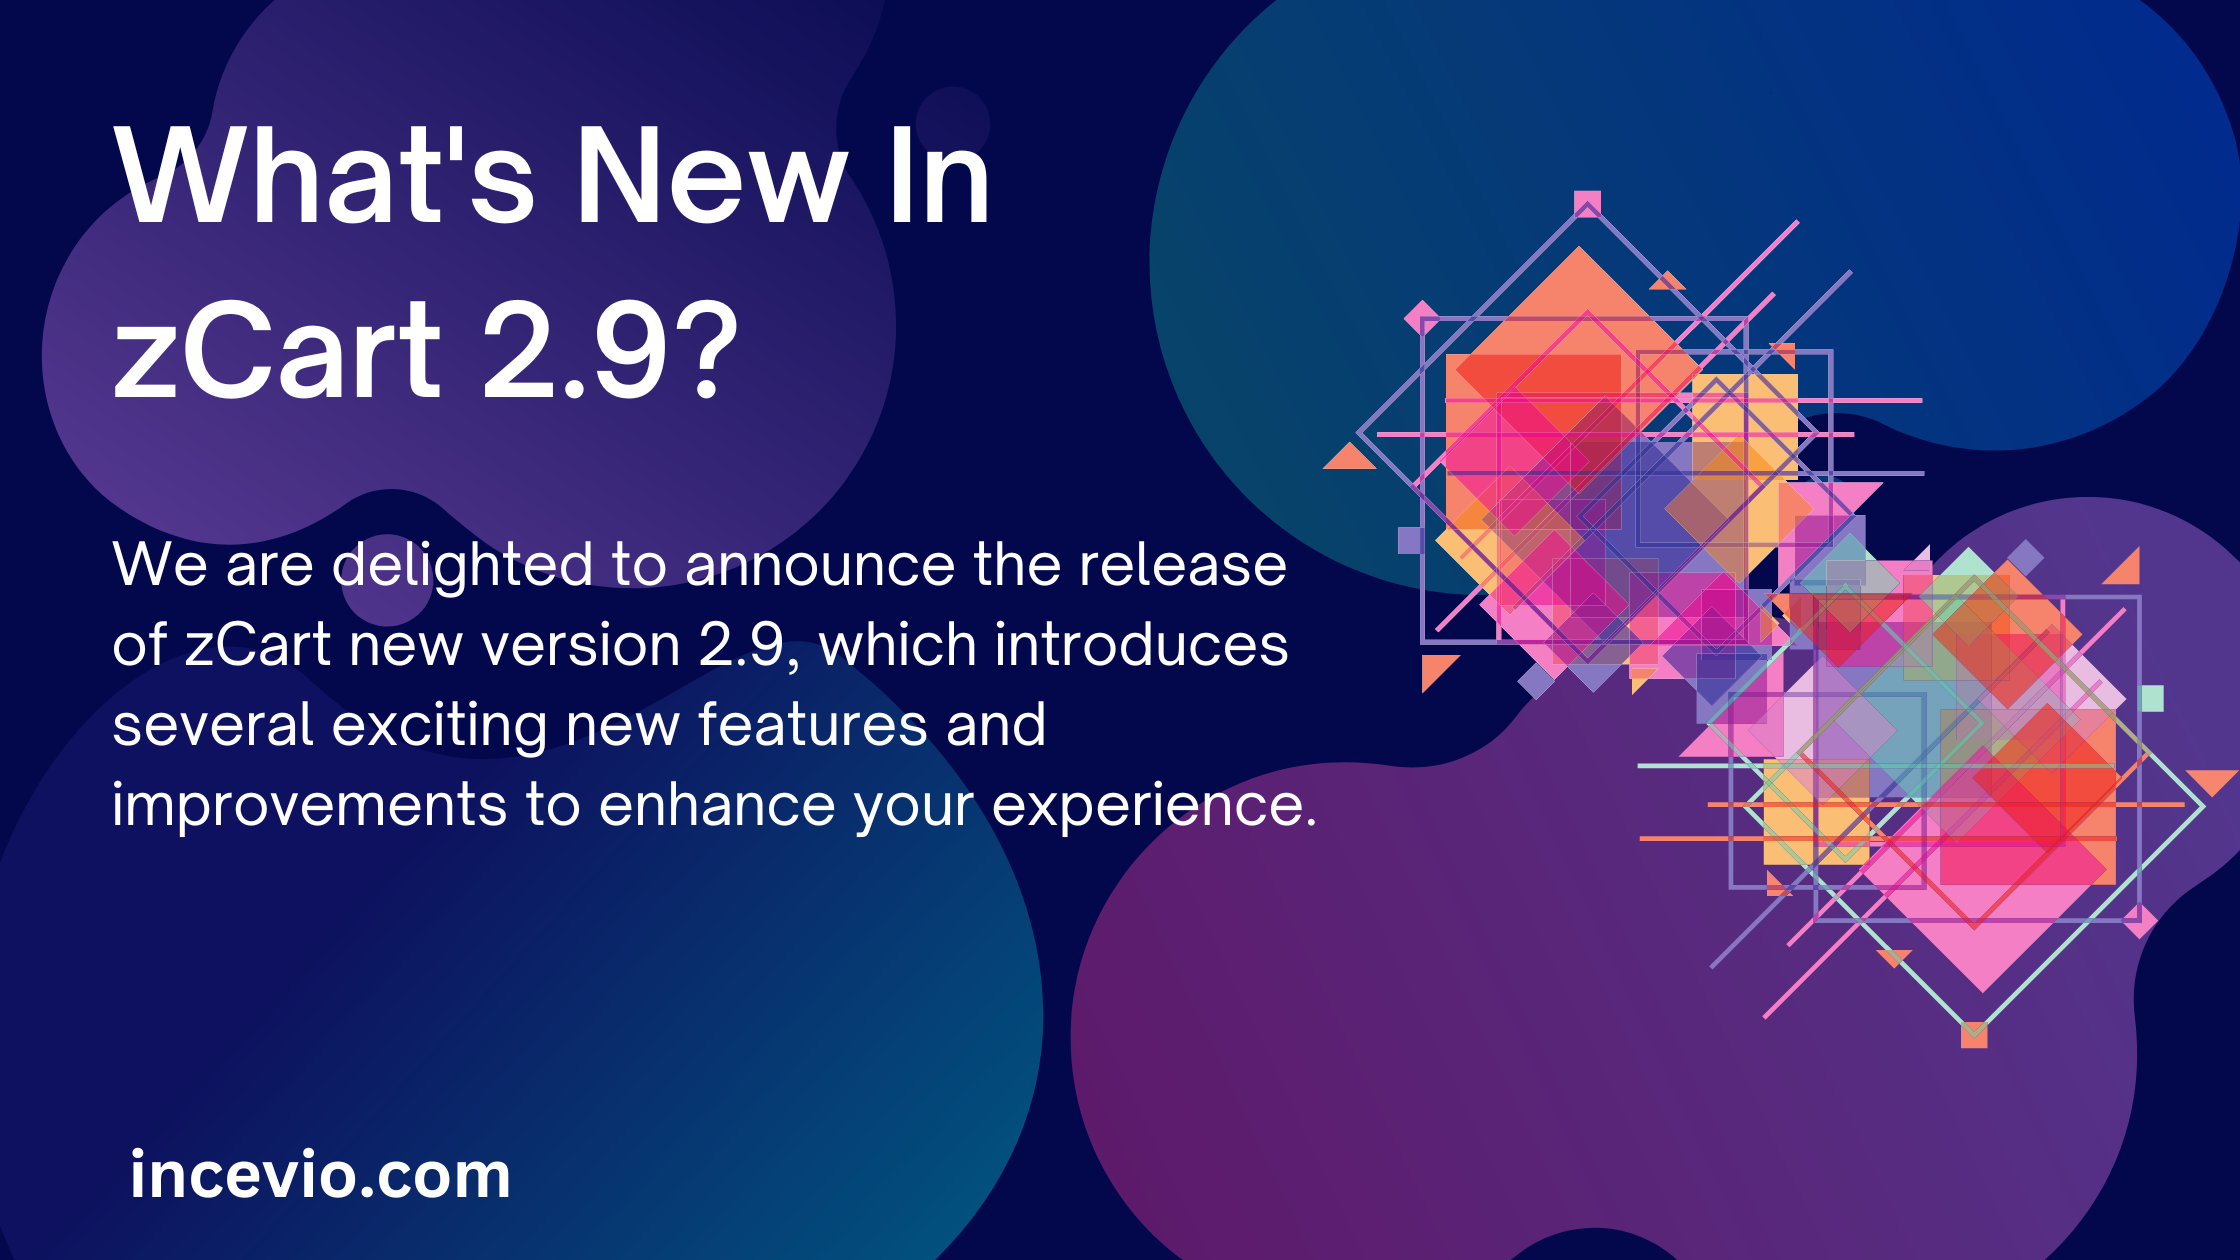 What's New In zCart 2.9?